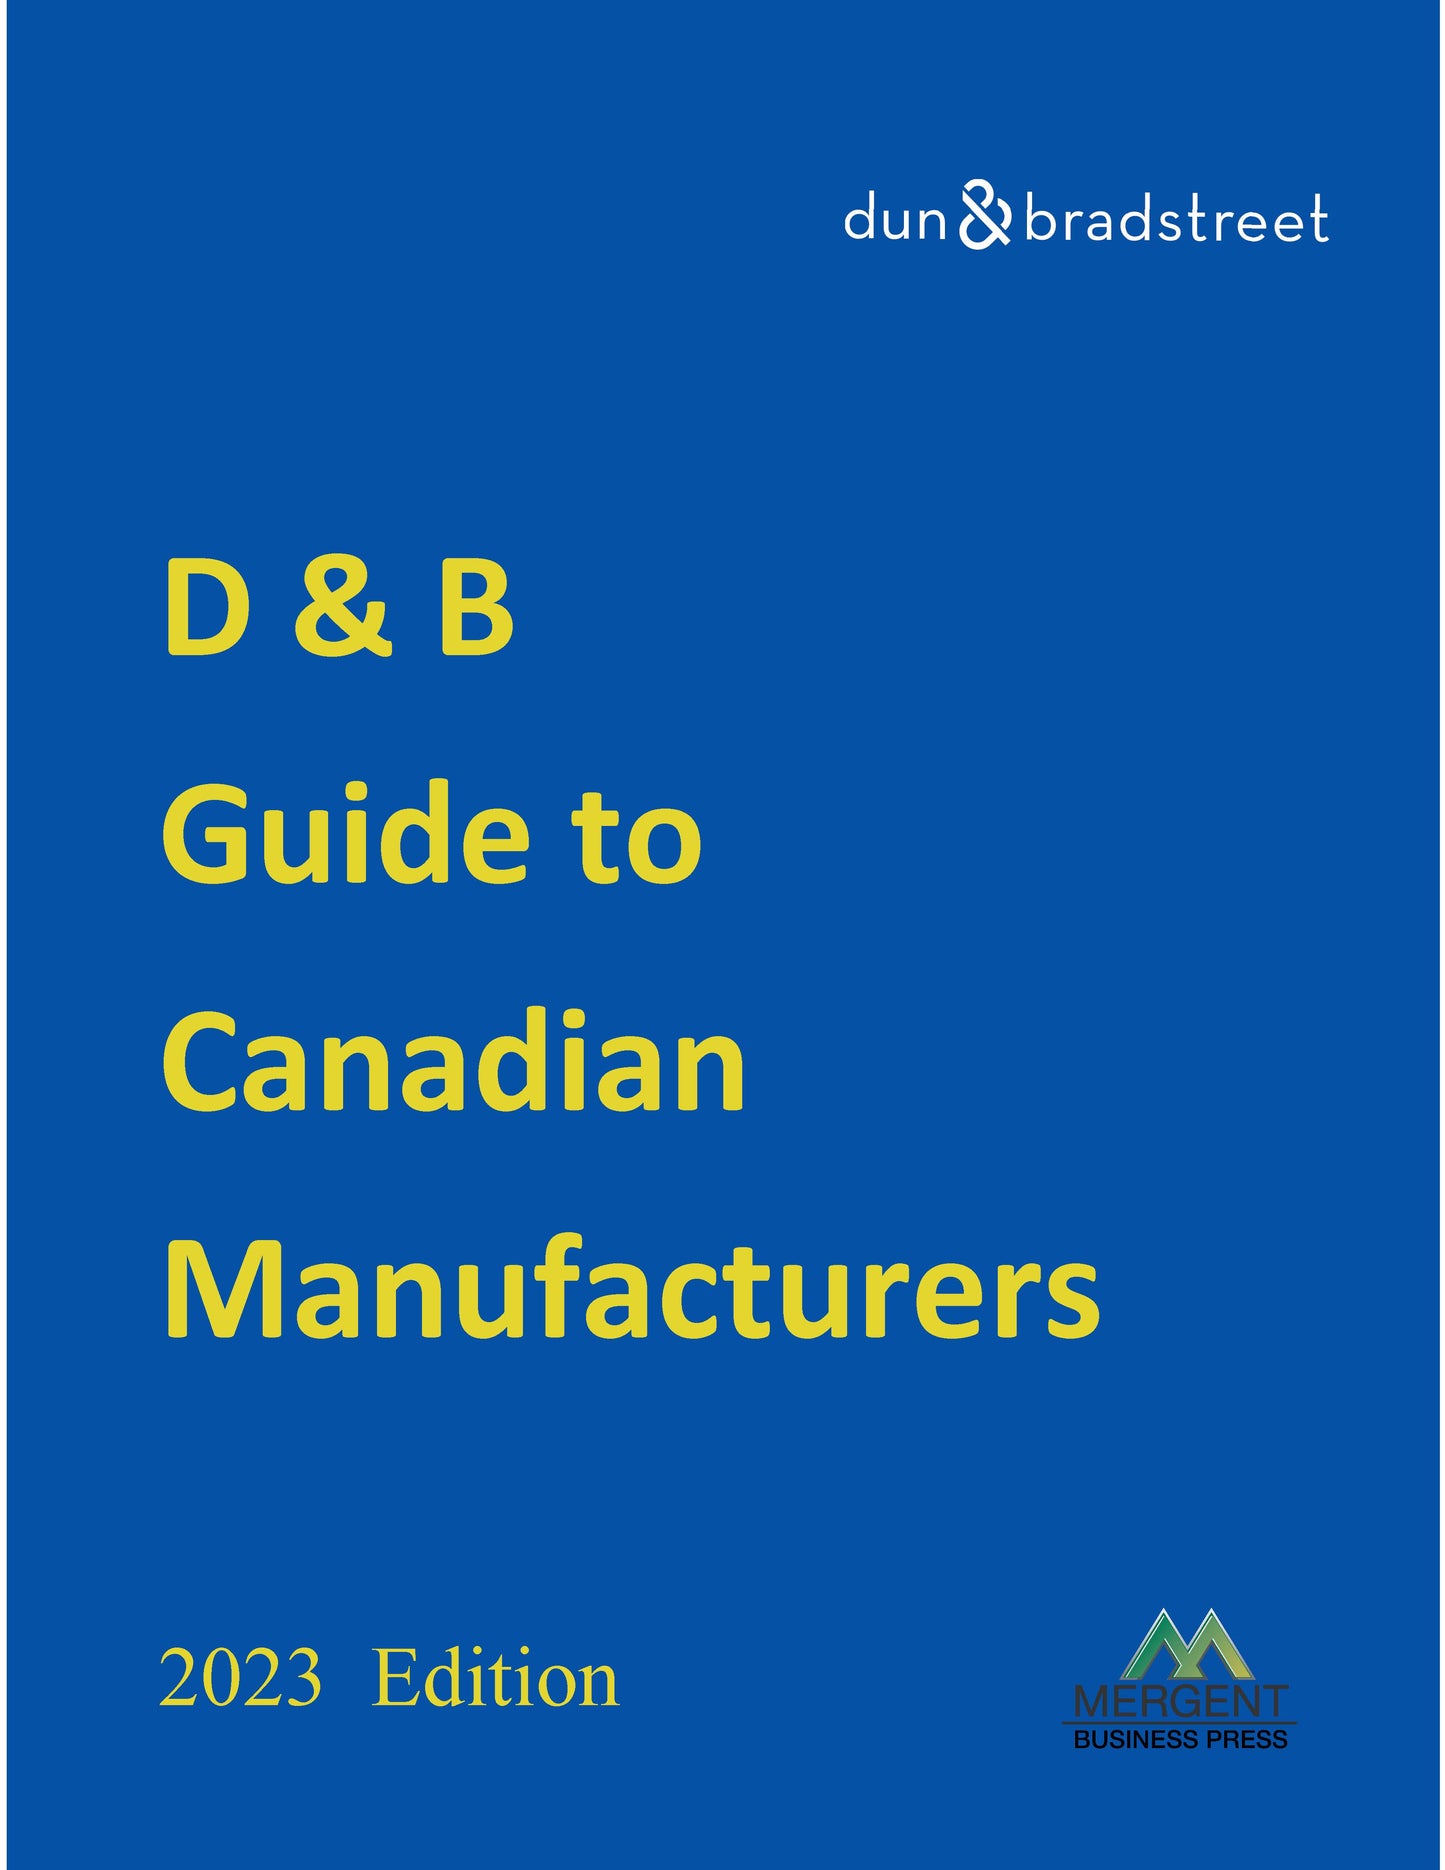 Guide to Canadian Manufacturers - Full Set